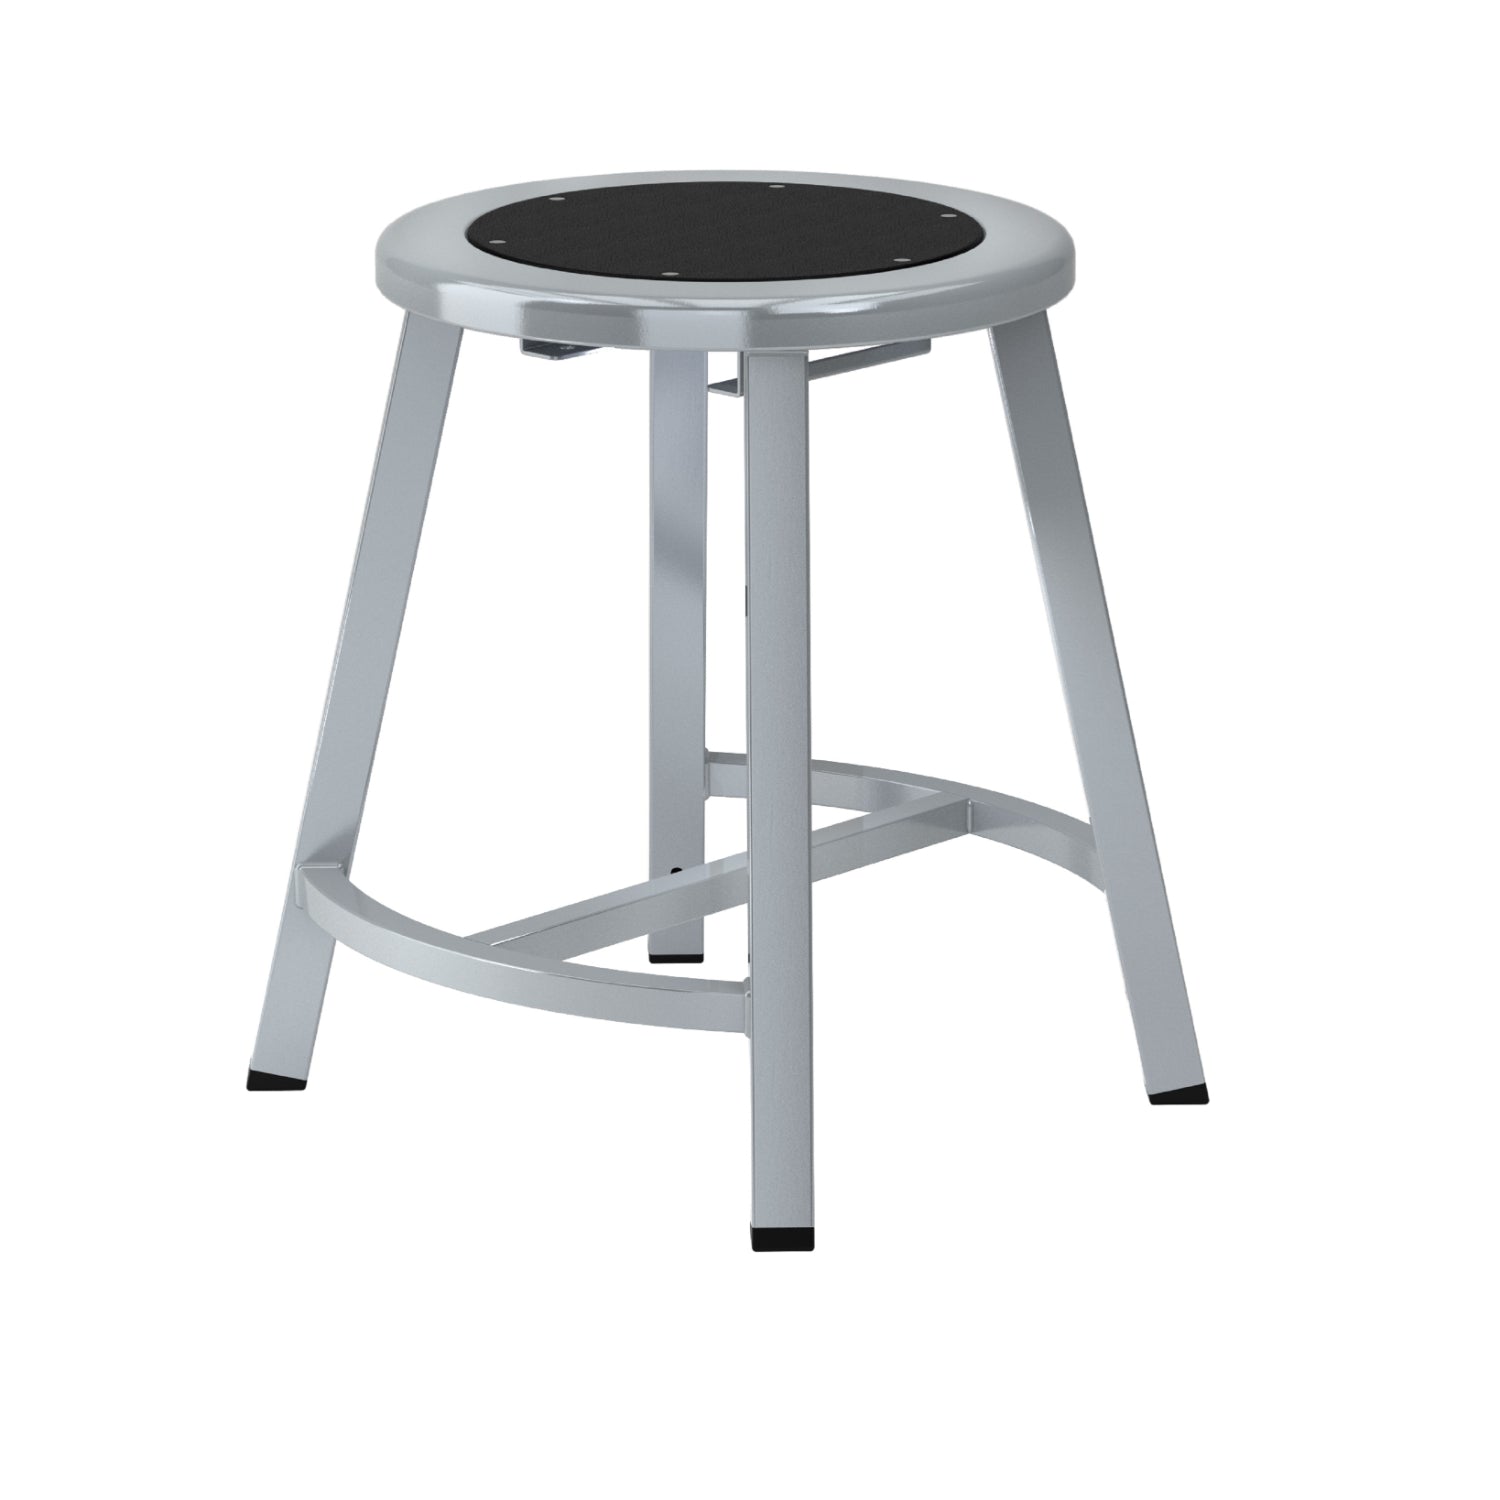 Titan Stool, Steel Seat with Black Poly Center, 18" H